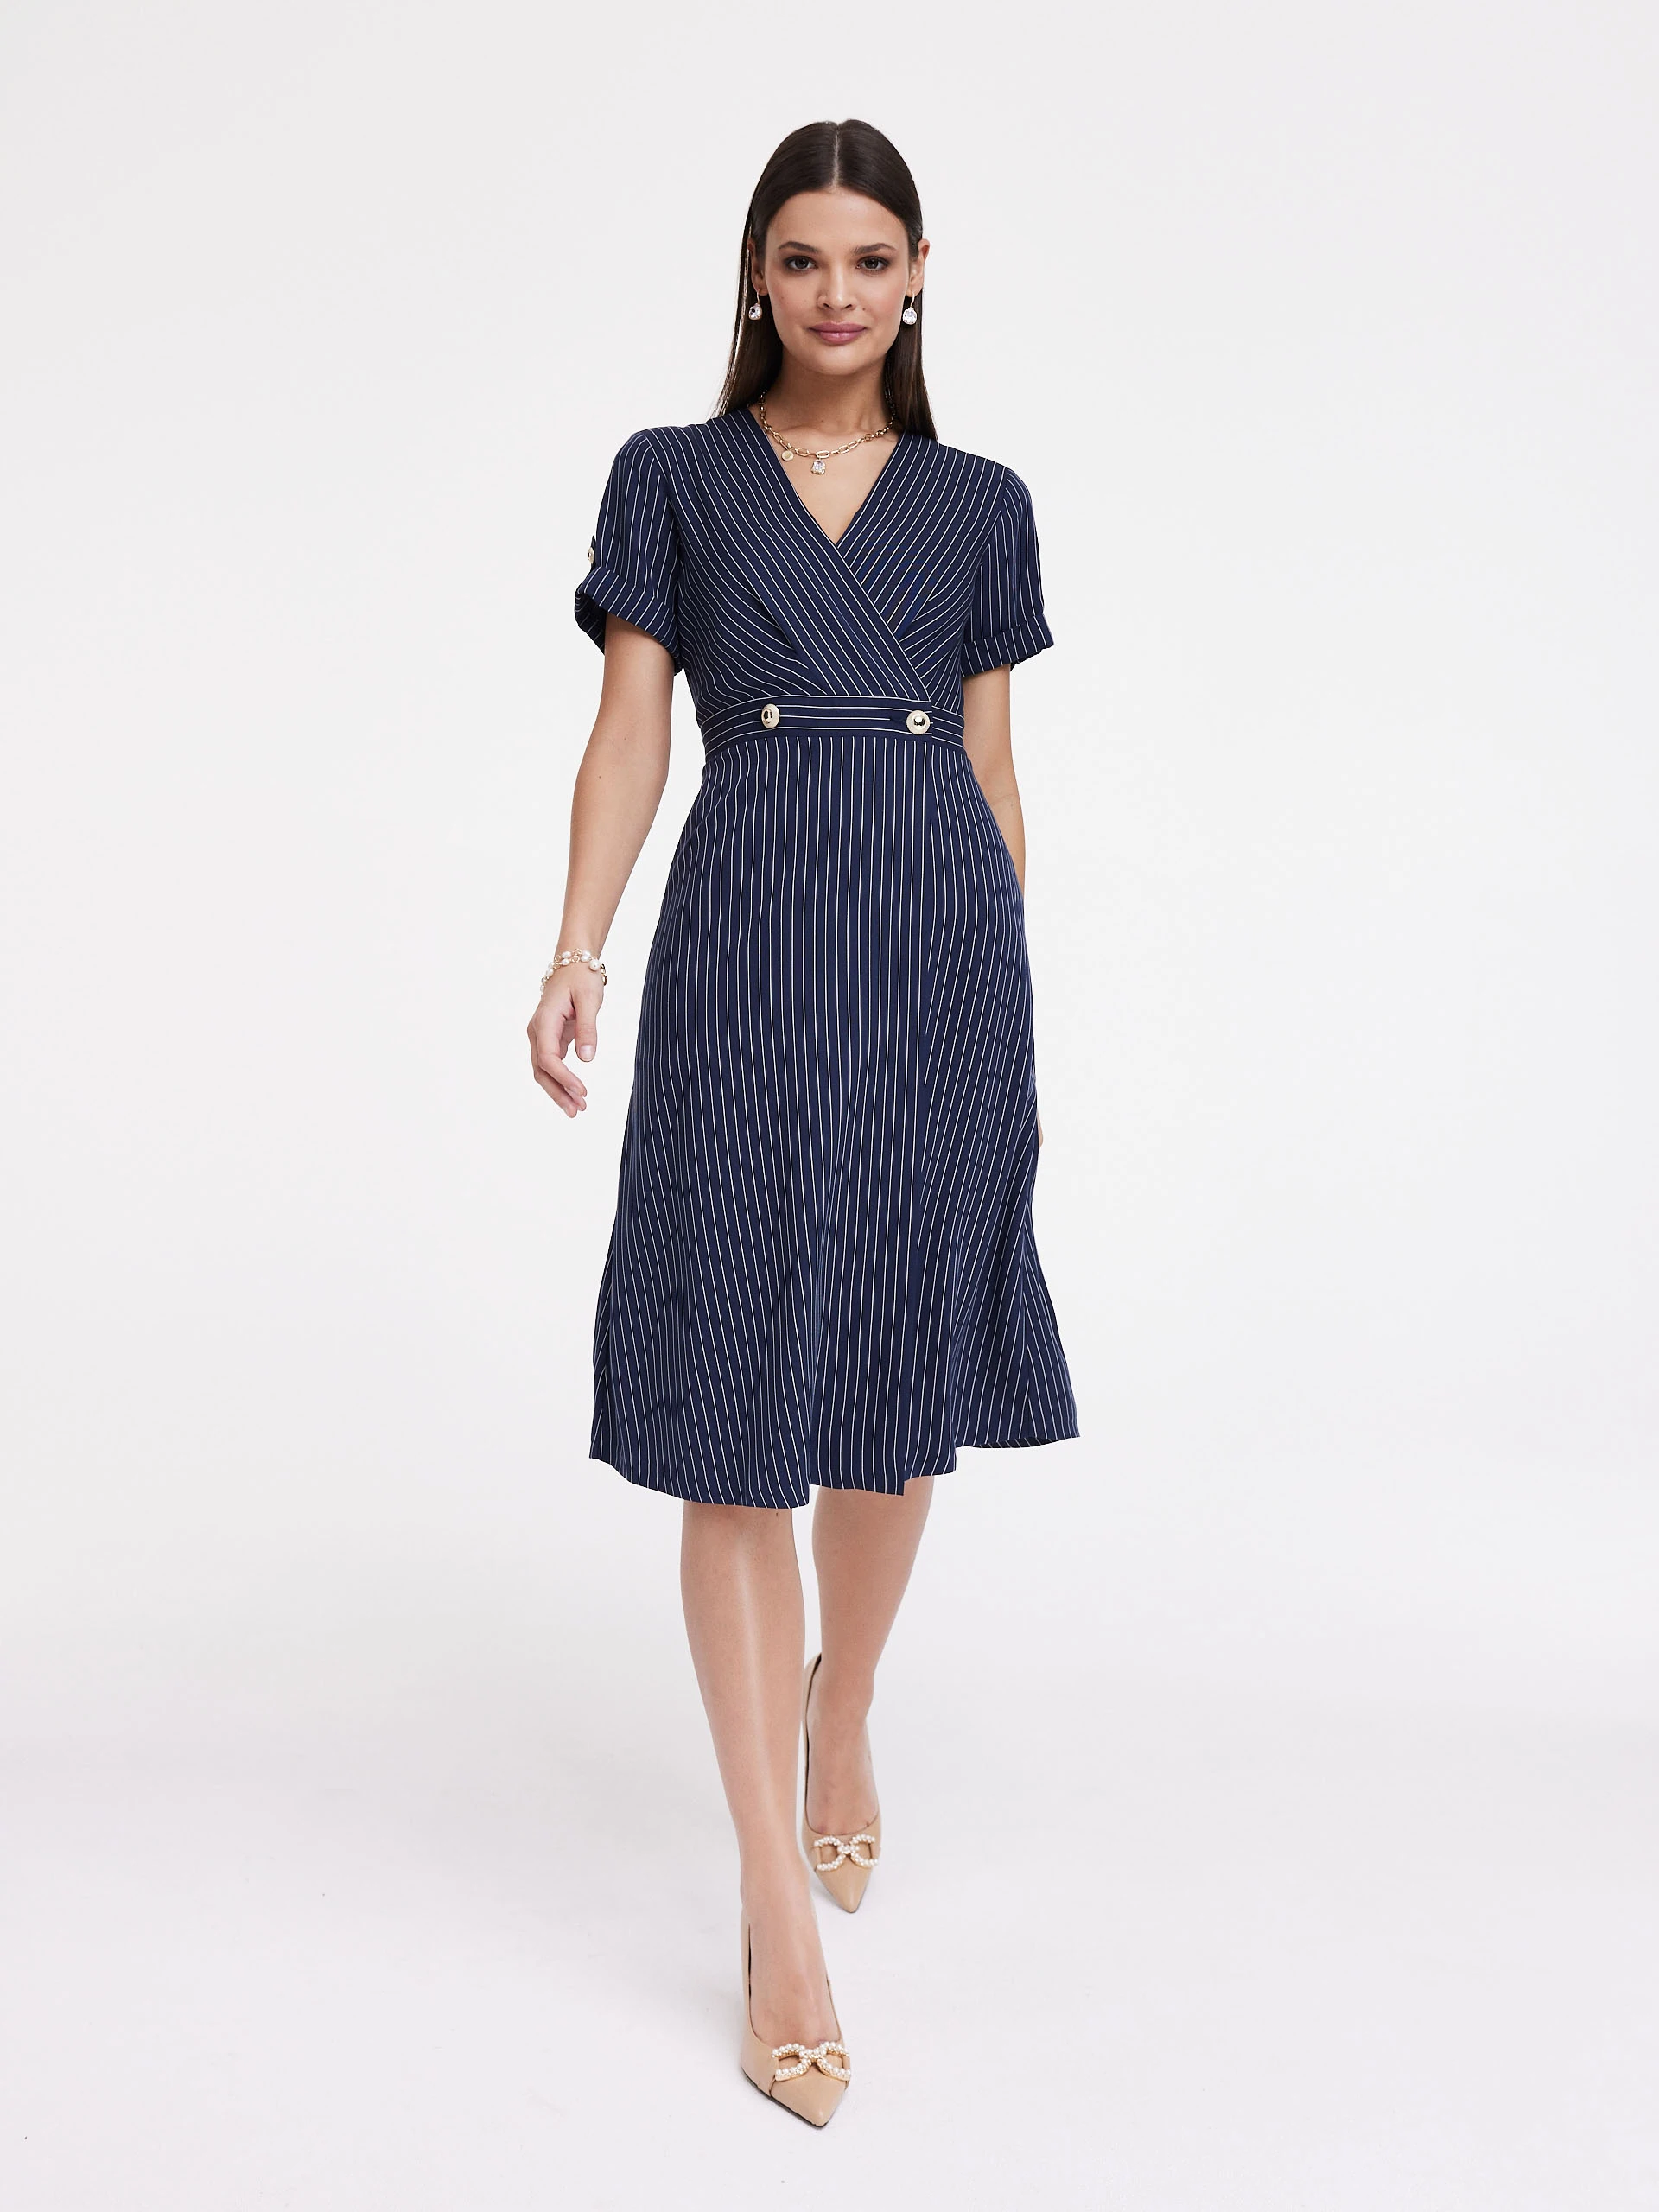 Navy blue dress with white stripes